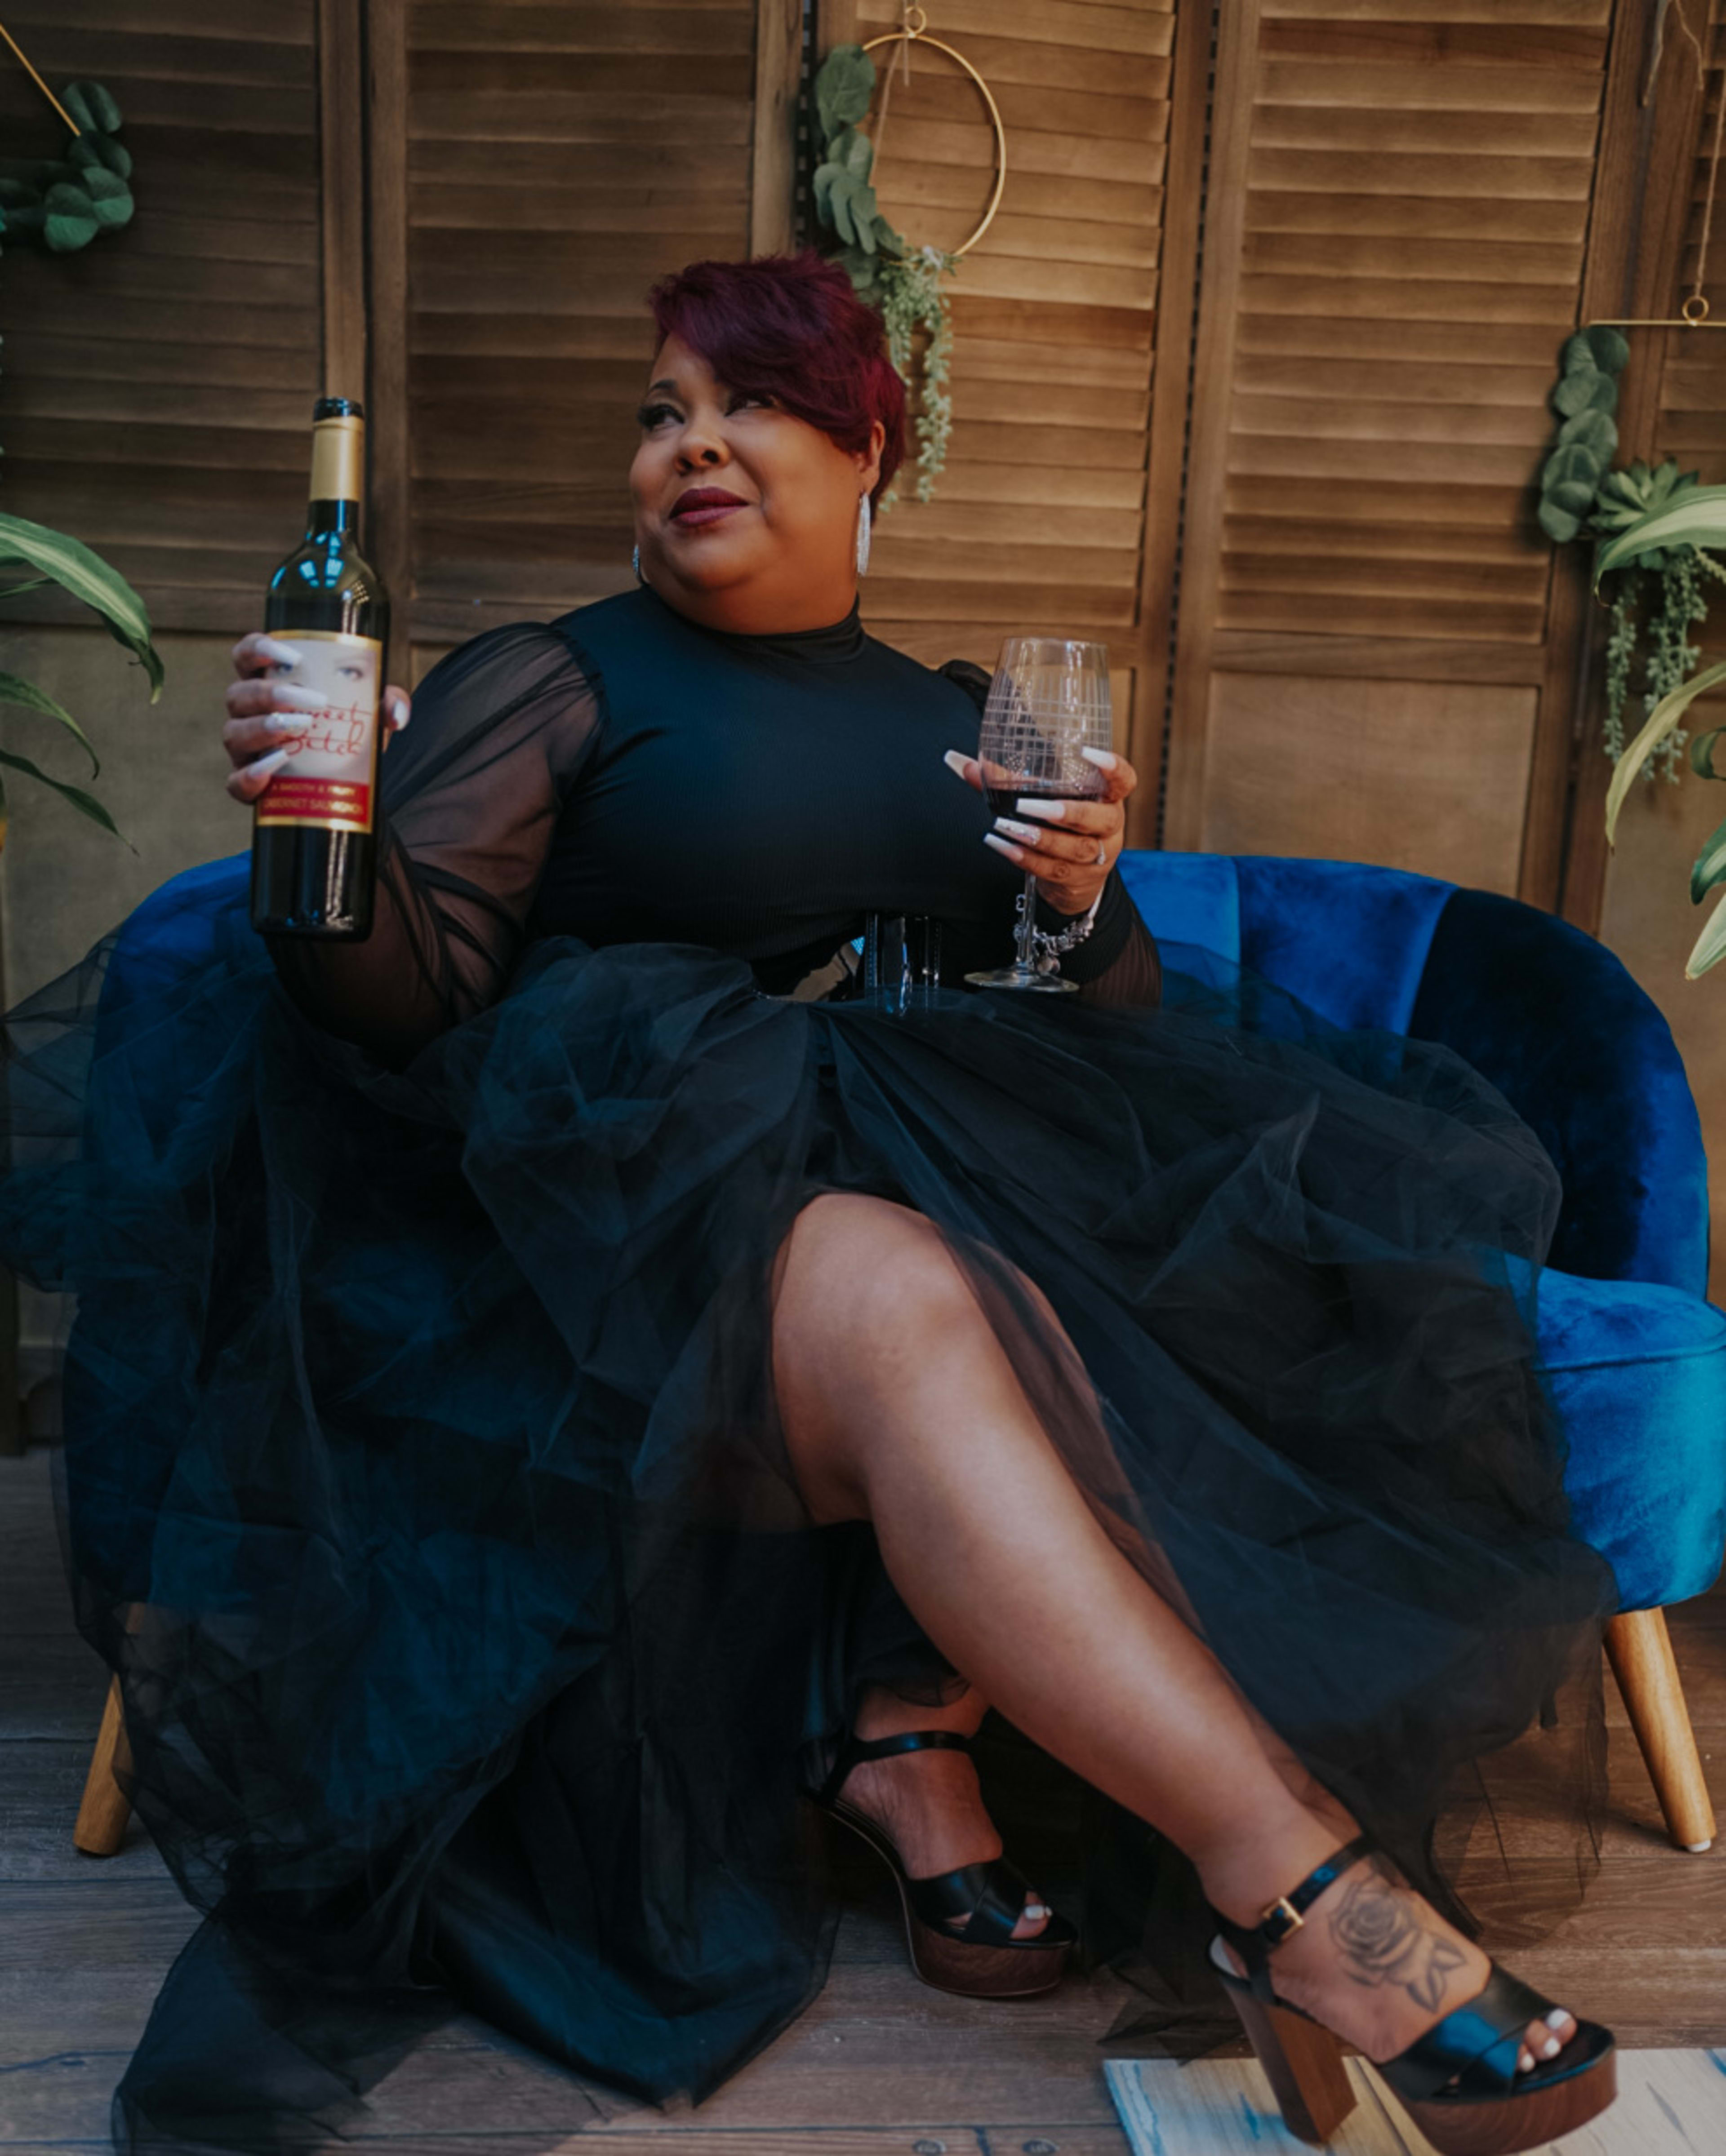 A woman holding a bottle of wine sitting on a blue chair during a photoshoot.